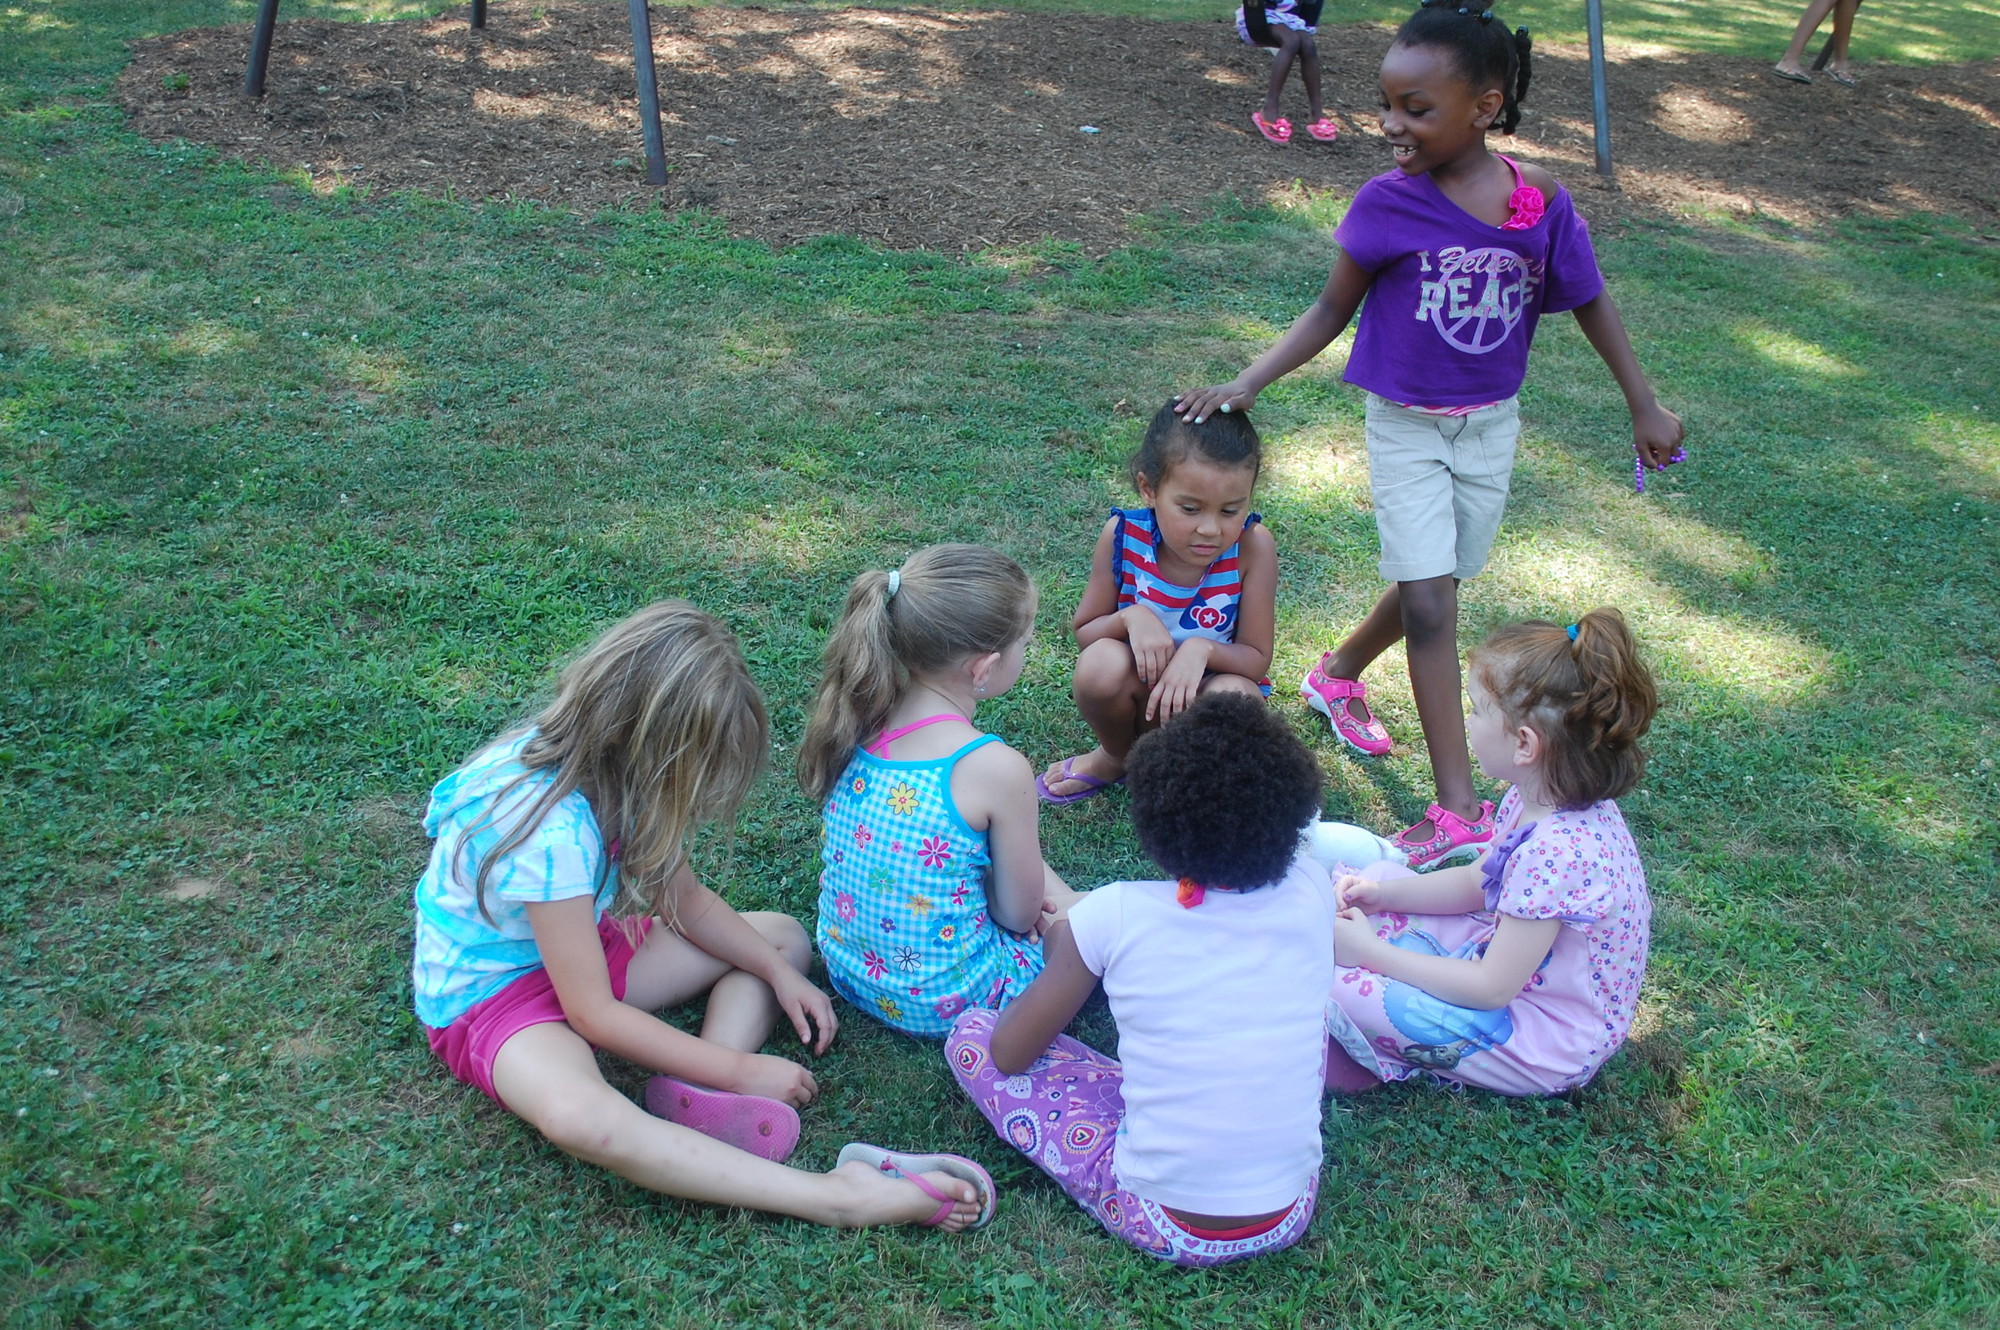 Children entertained themselves with a game of Duck, Duck, Goose.